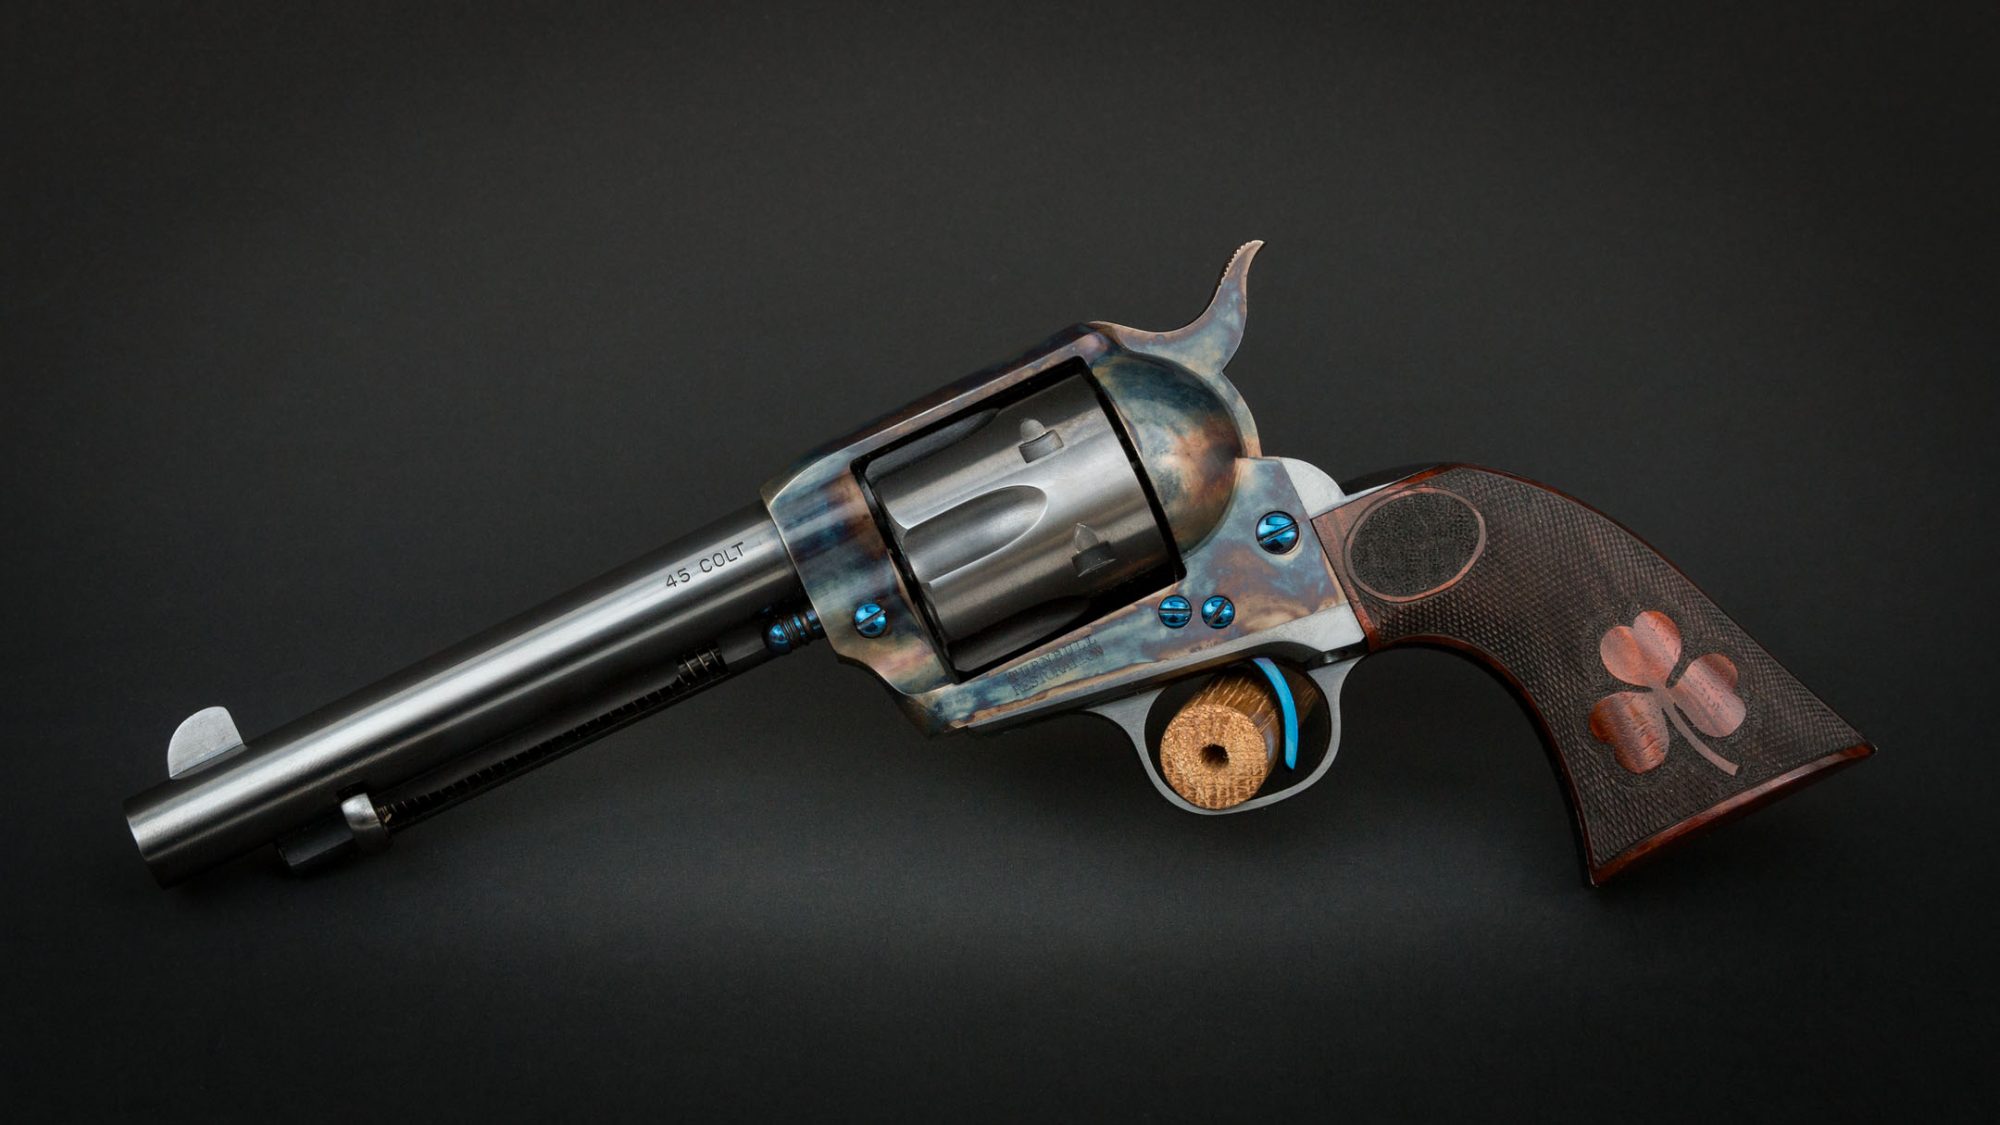 Turnbull SAA Revolver, for sale by Turnbull Restoration of Bloomfield, NY